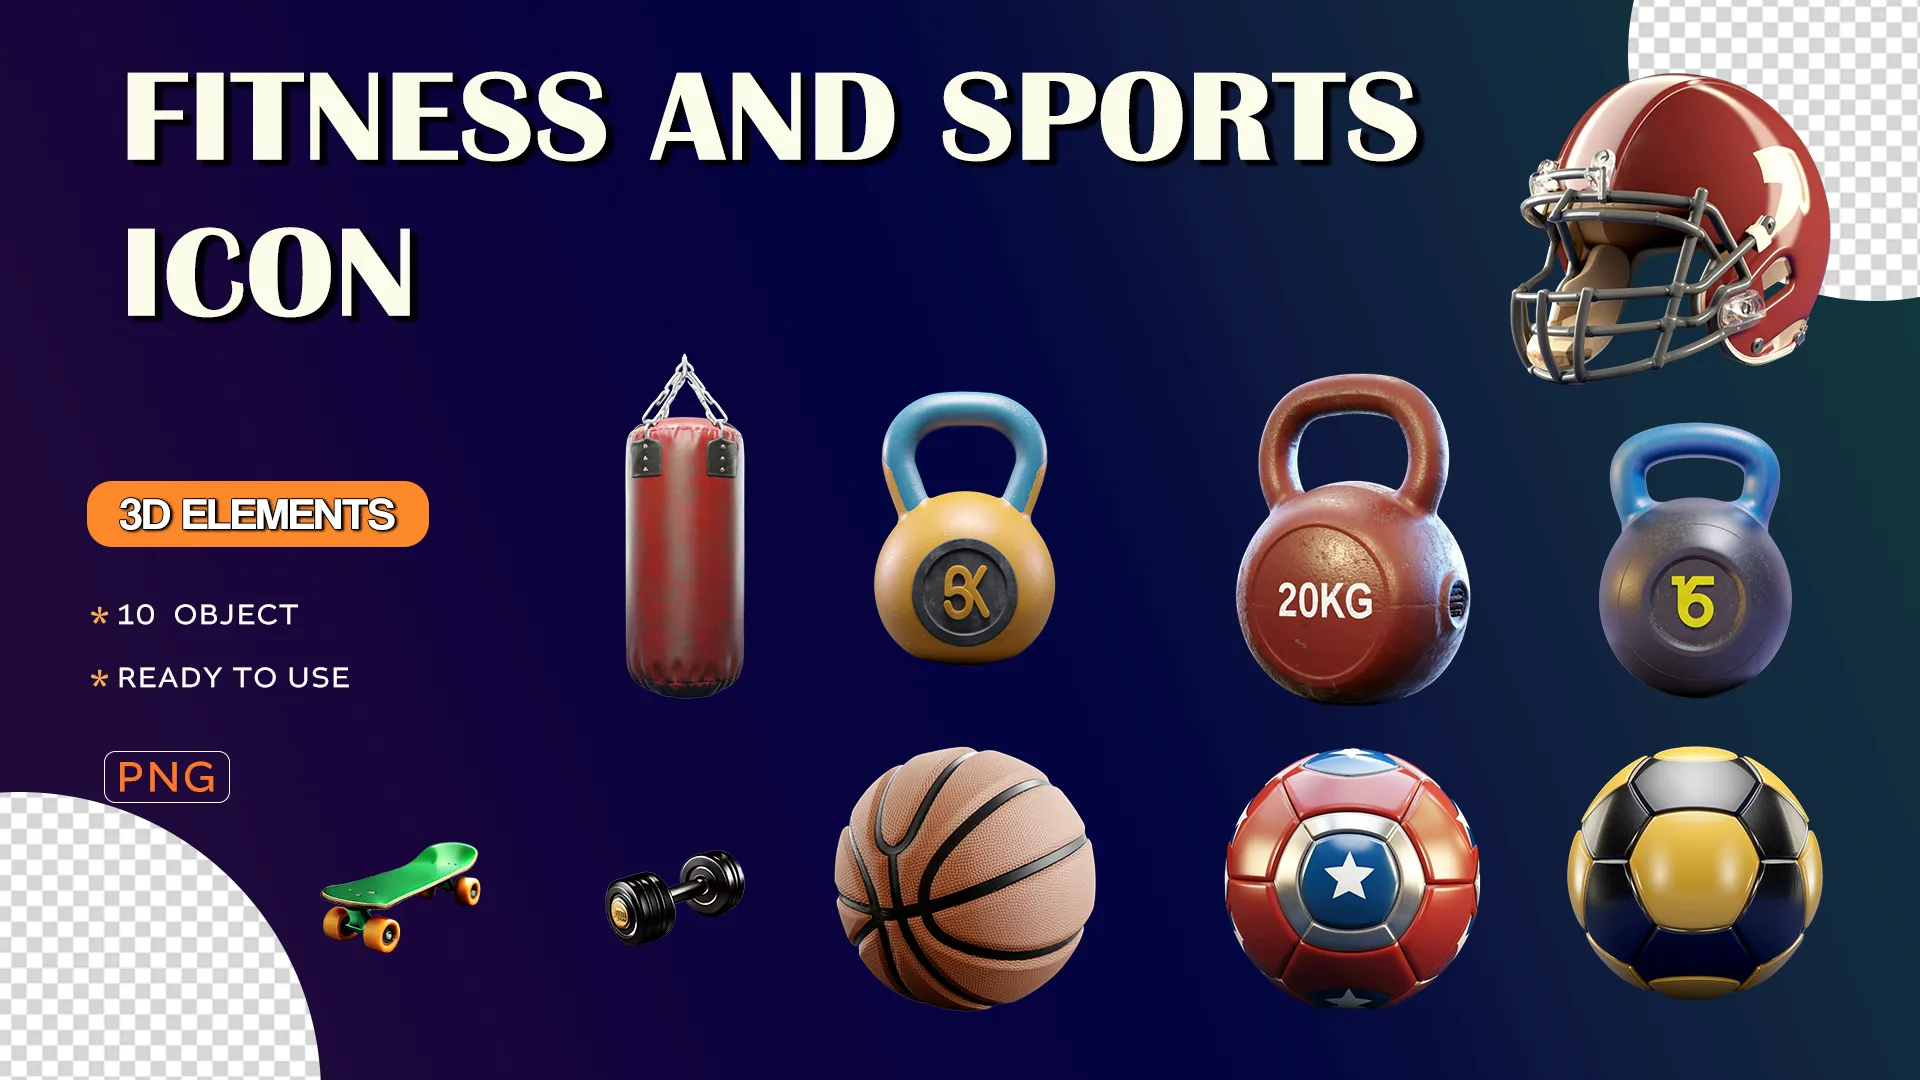 Dynamic Fitness and Sports Quality 3D Sports Icons Set image